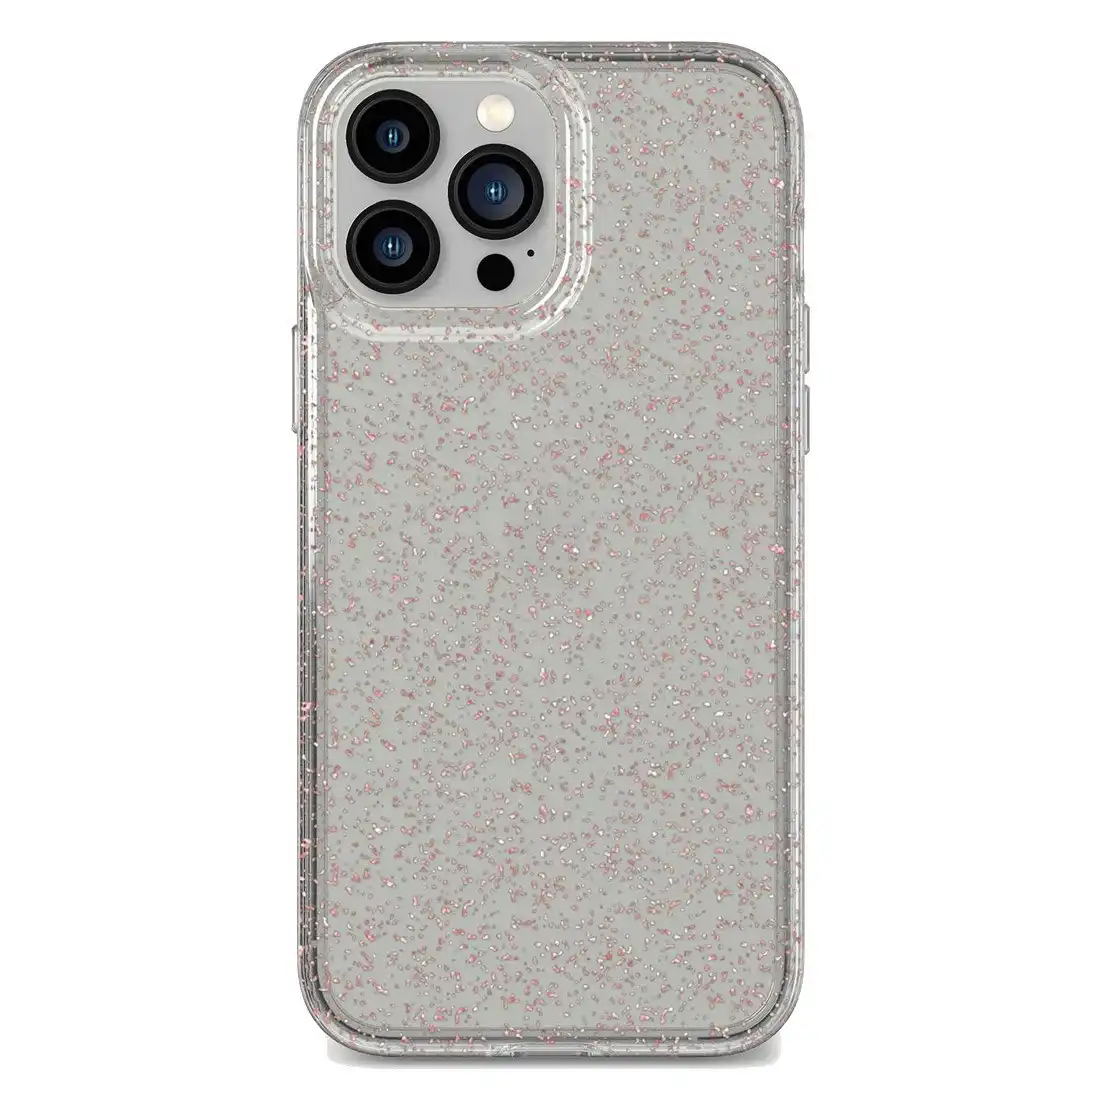 Tech21 Evo Sparkle Case for iPhone 13 Pro Max T21-8997 - Rose Gold